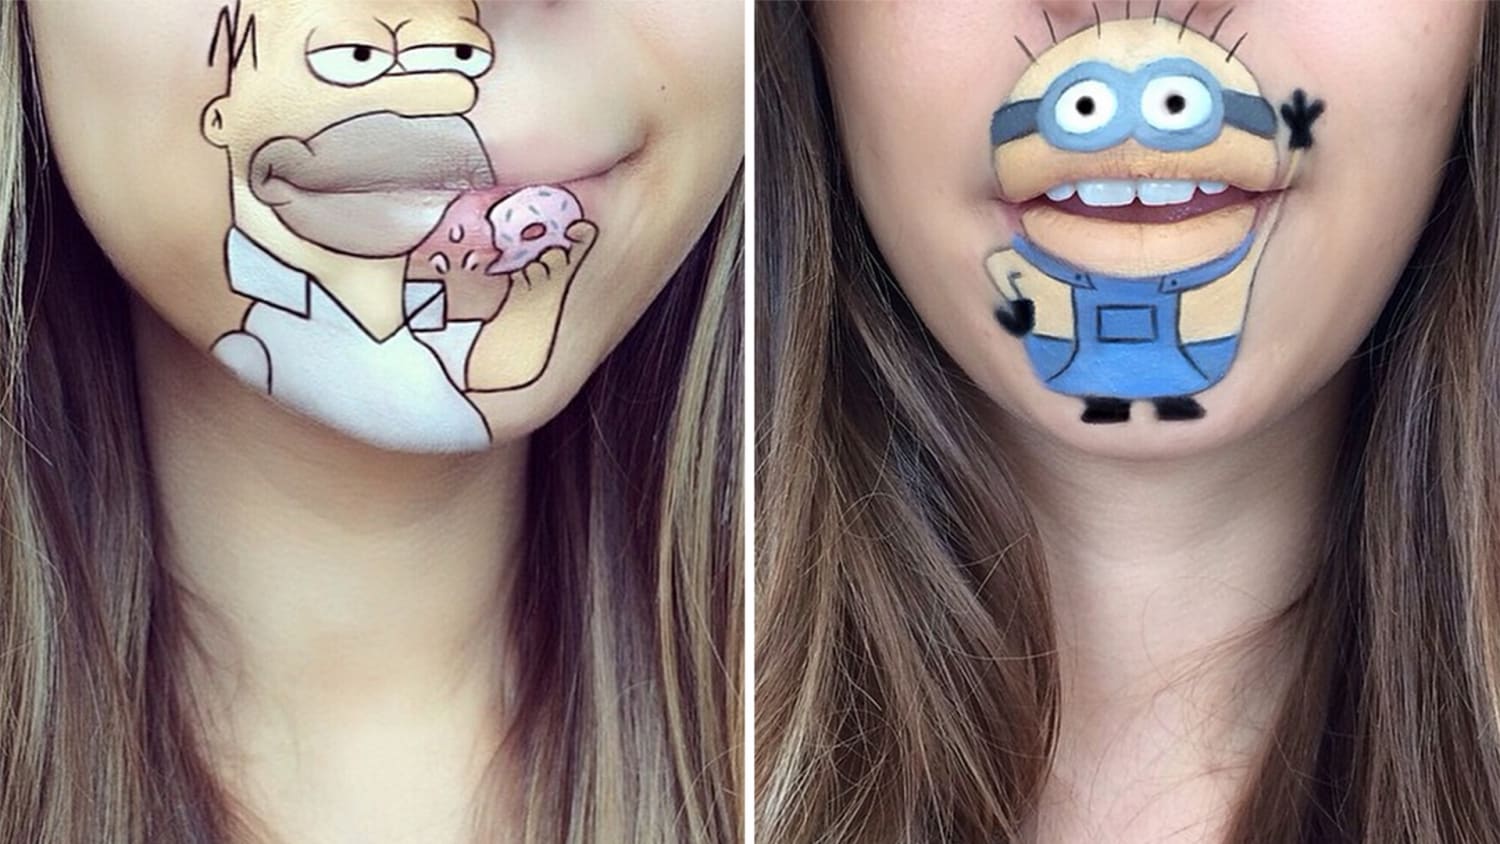 Makeup artist perfectly re-creates cartoon characters on her face